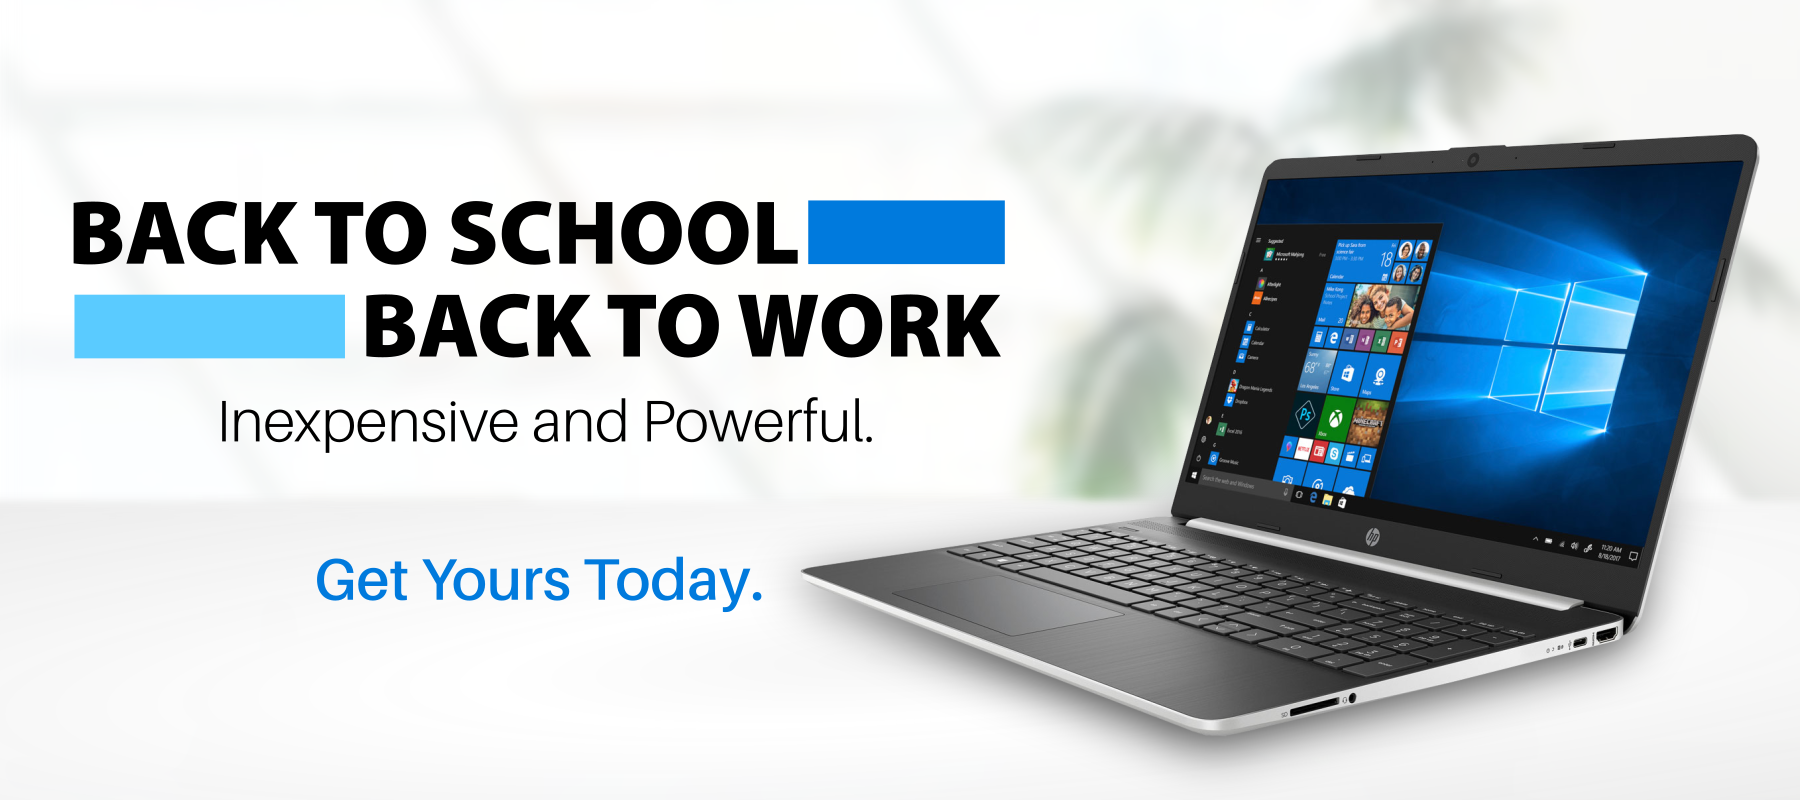 Signa has great laptops & Desktops for Work, Home, and School